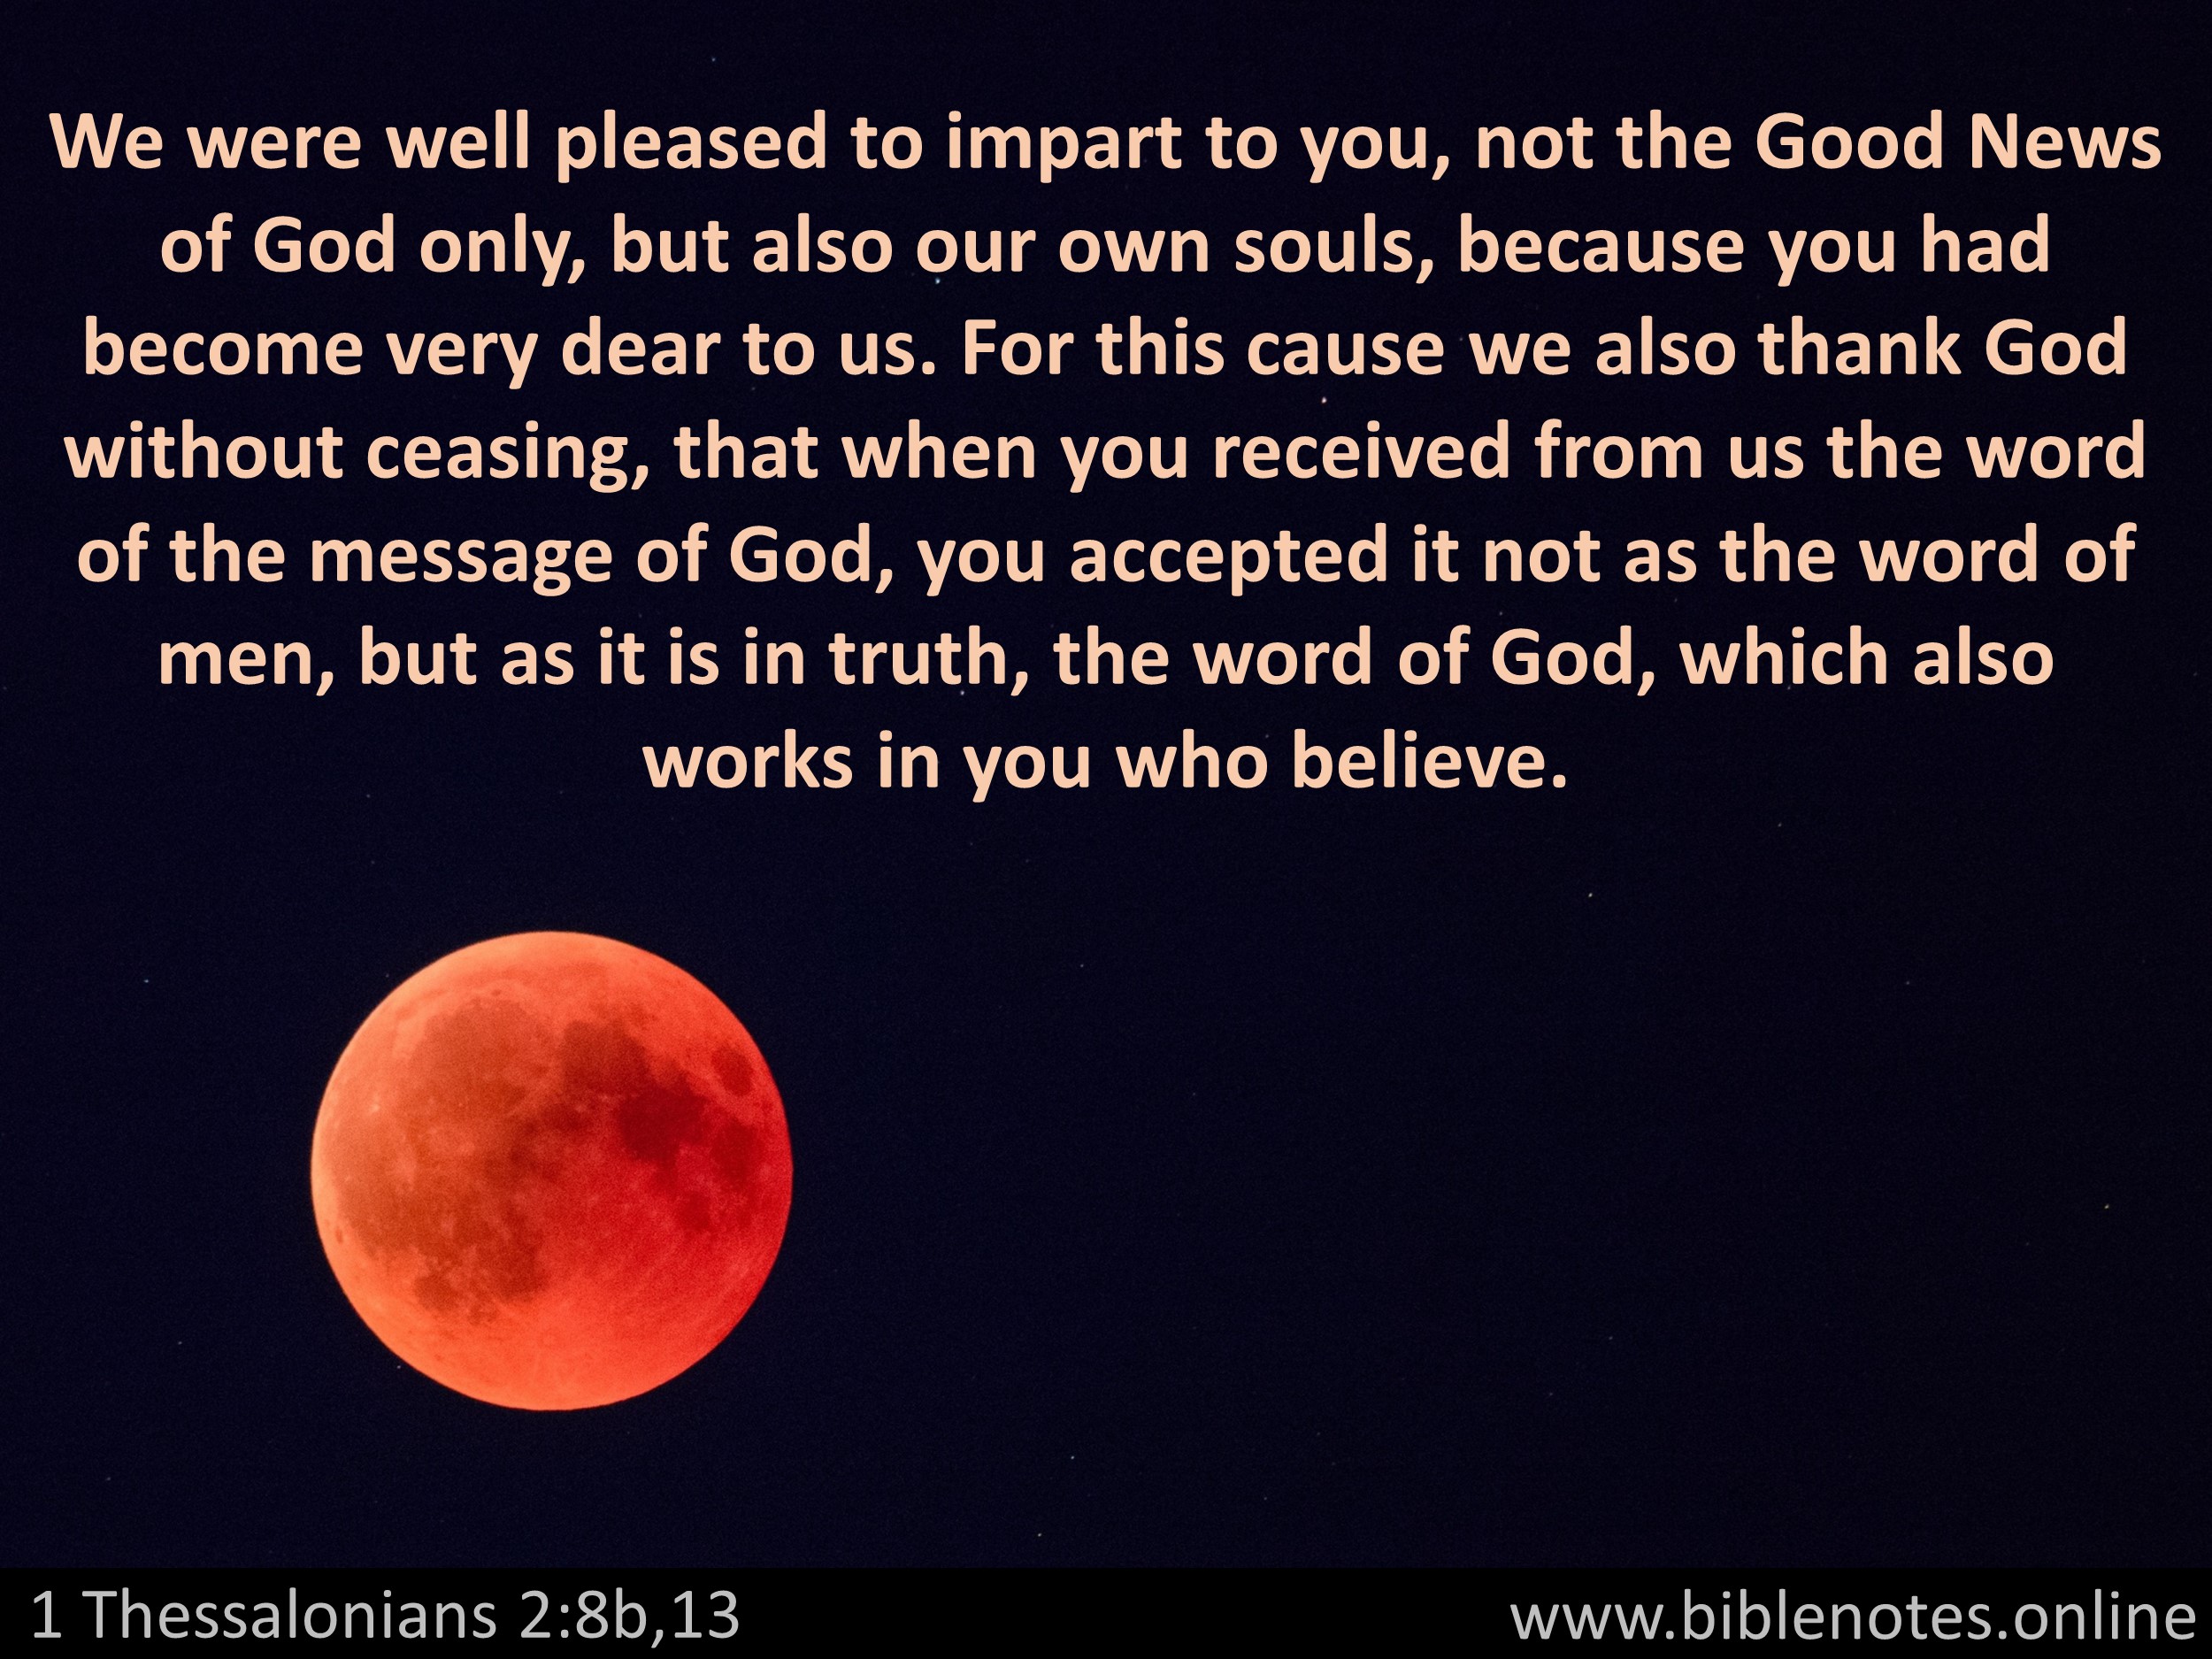 Bible Verse from 1 Thessalonians Chapter 2